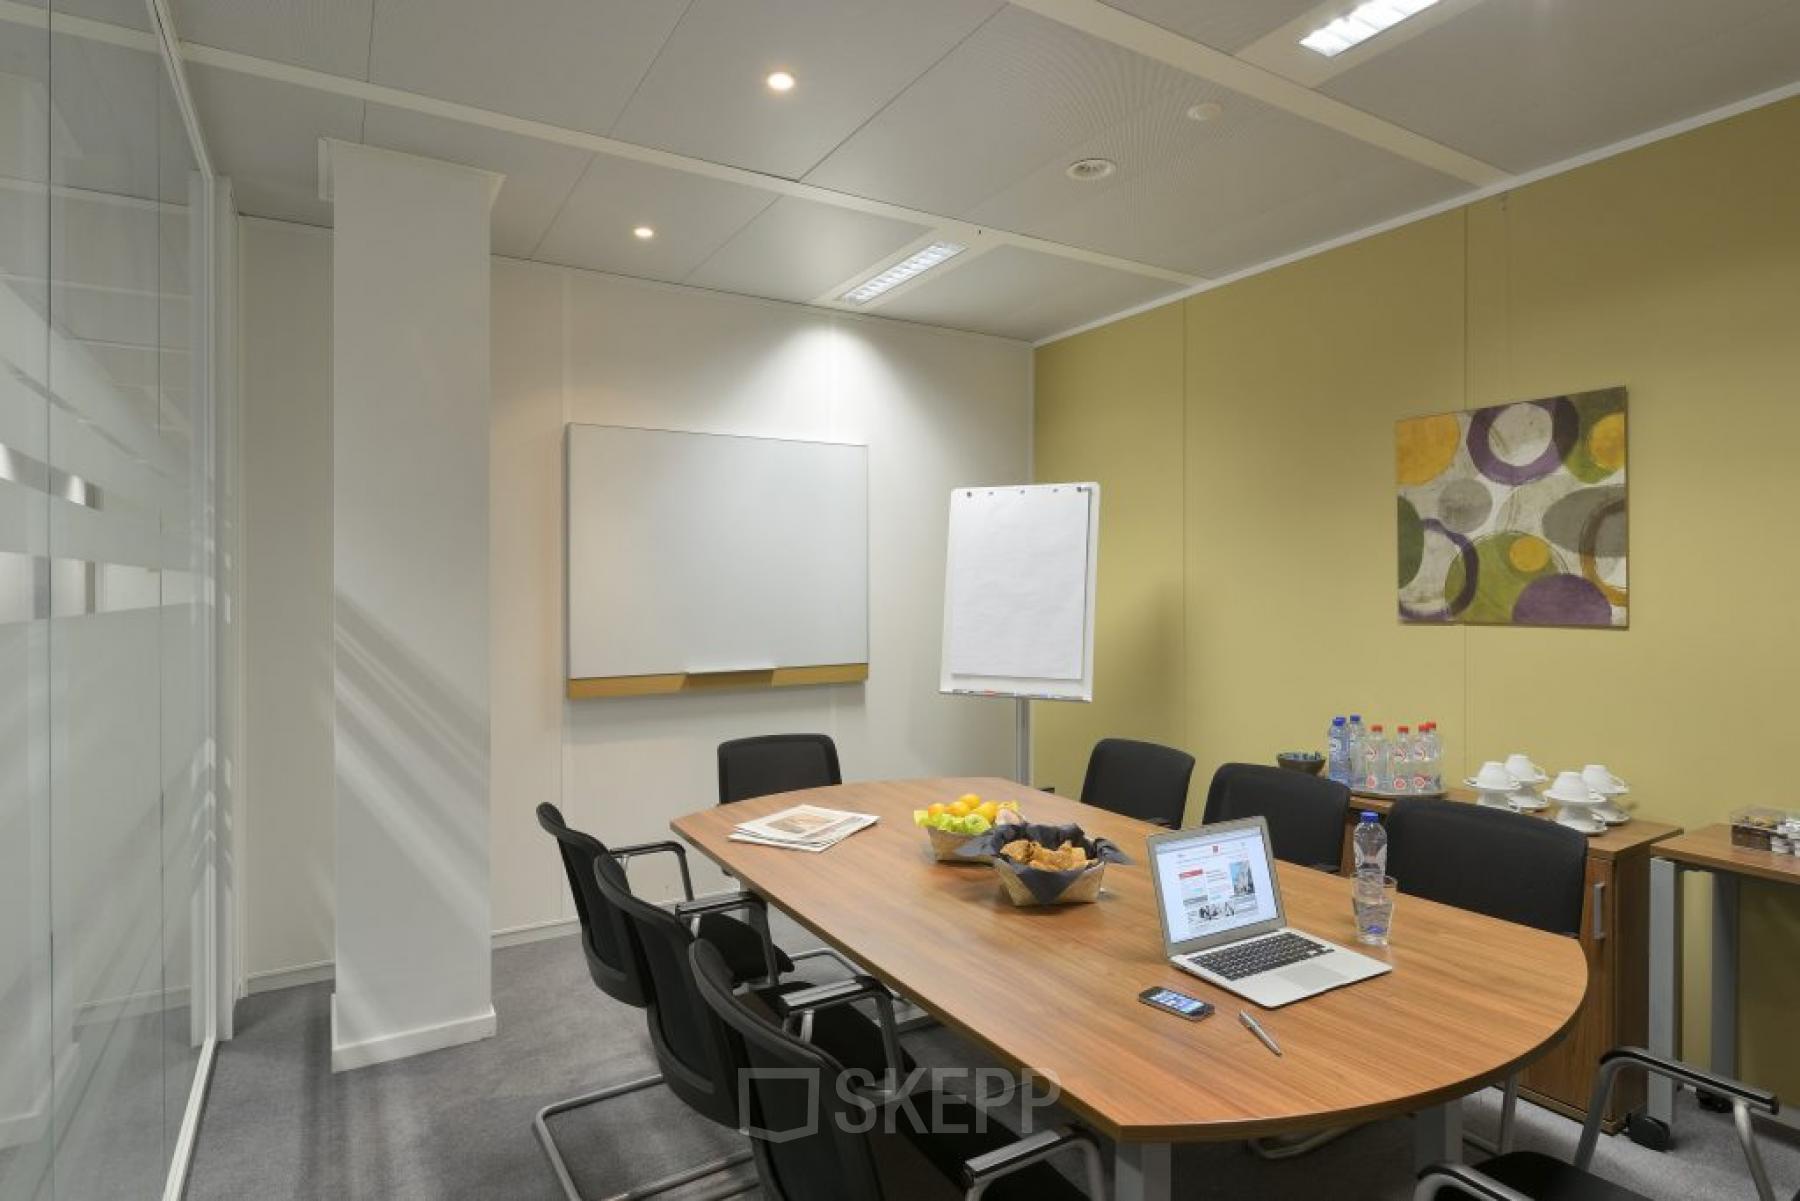 Meeting room at the Schuman